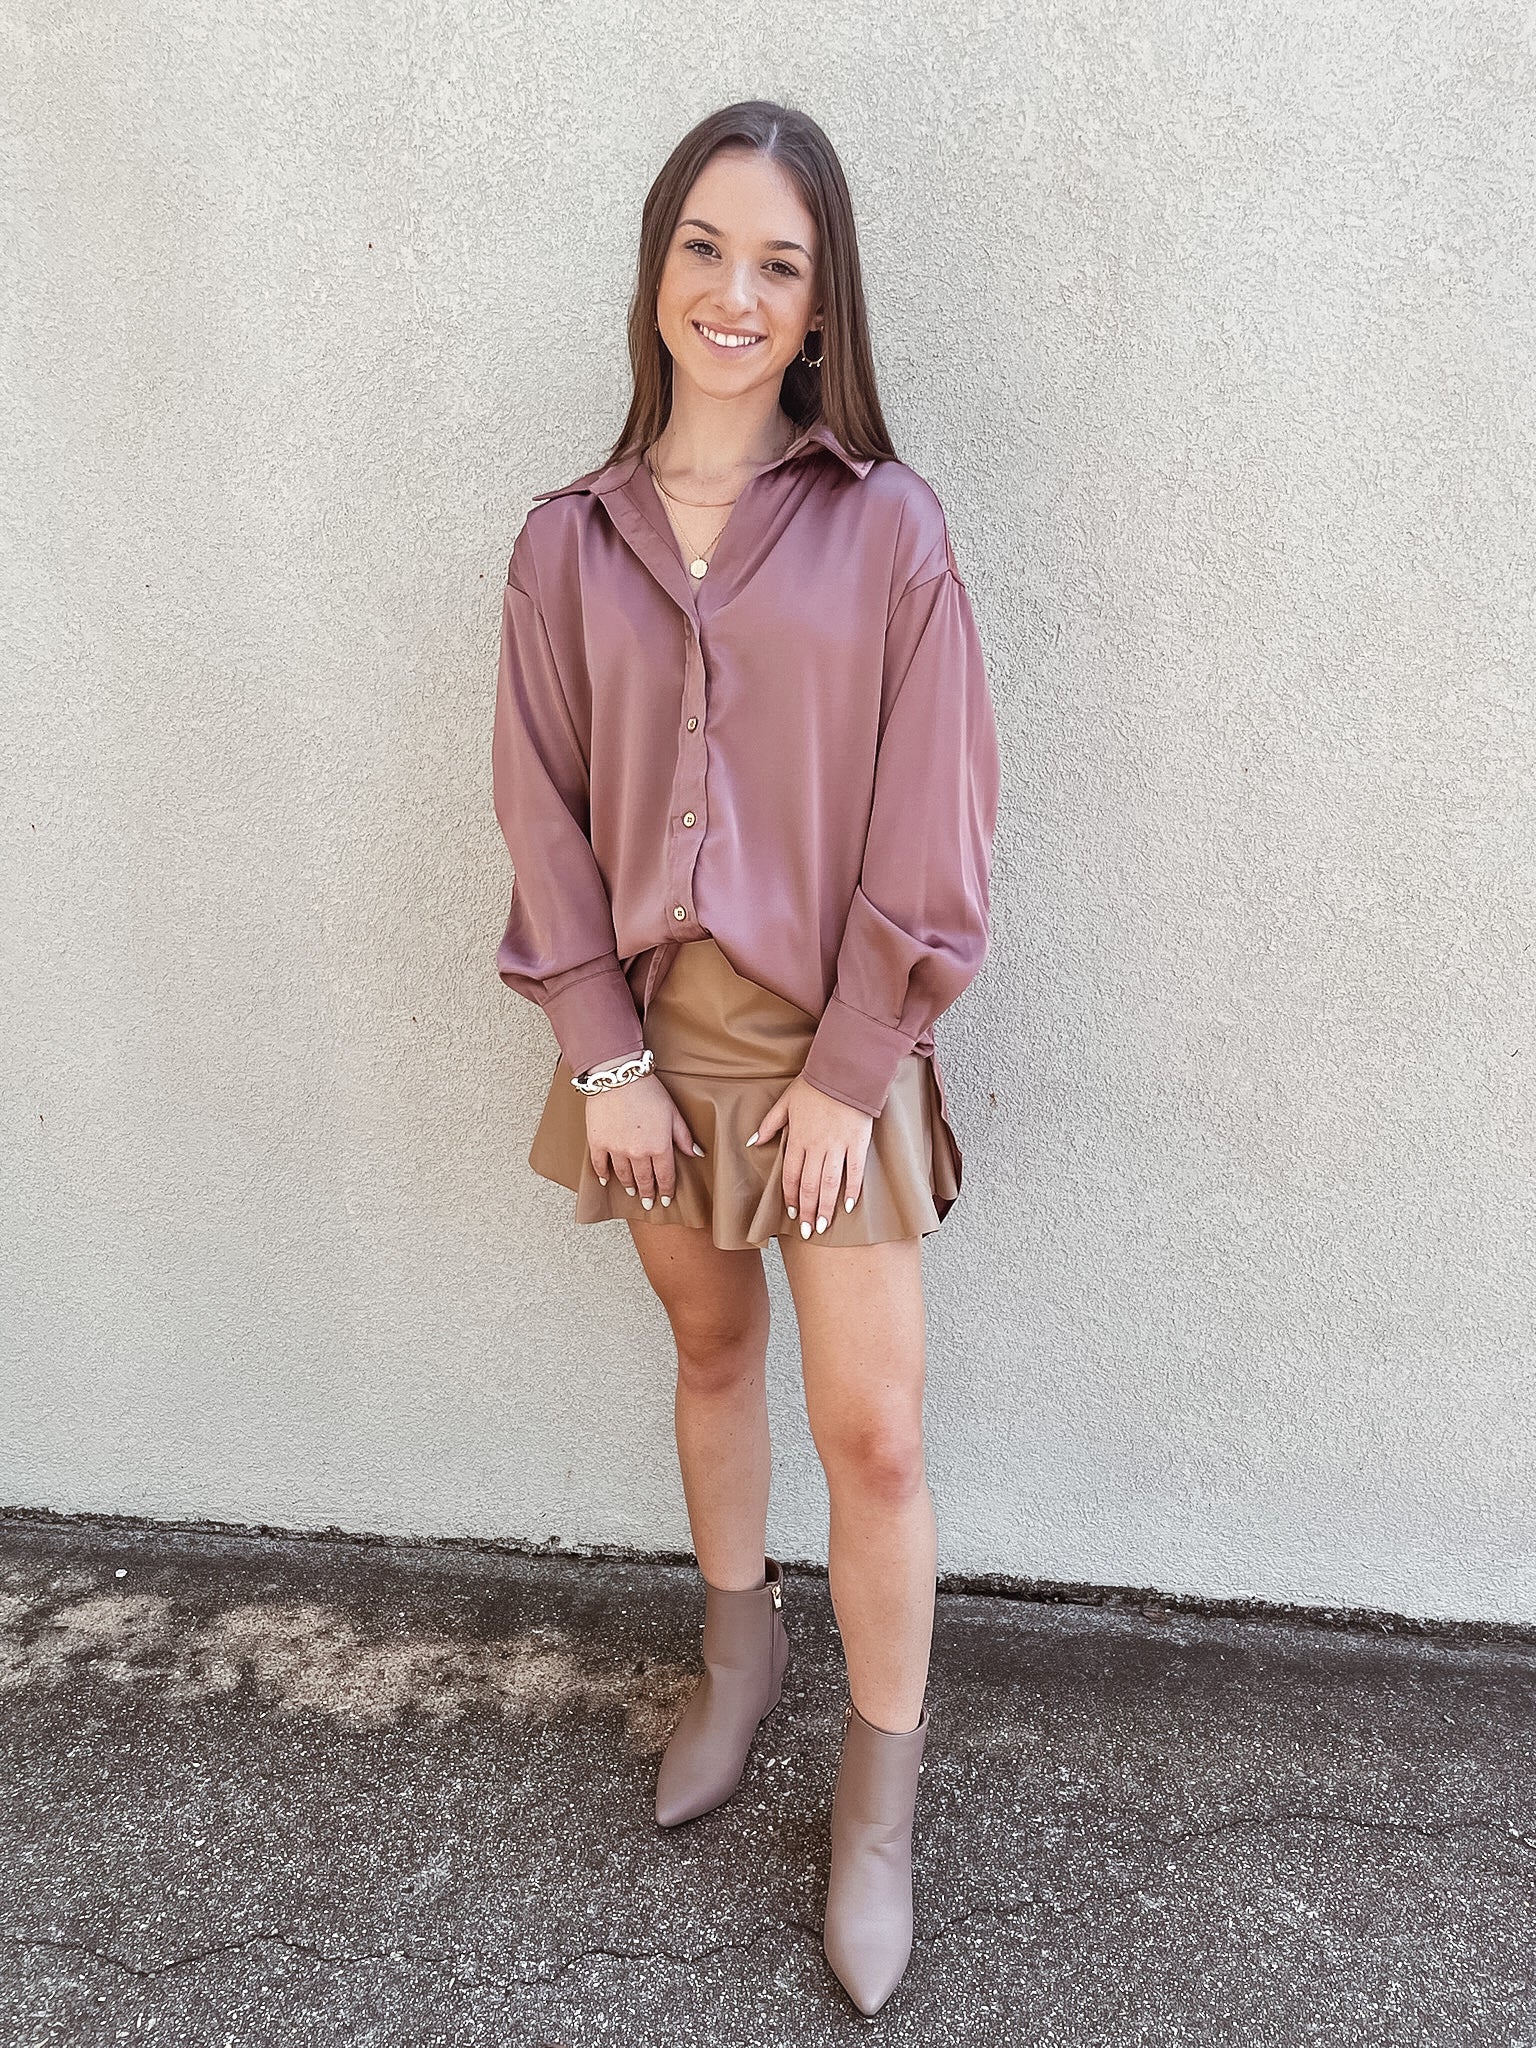 Tell Me Something Good Long Sleeve Button Up Top in Dark Mauve - Giddy Up Glamour Boutique